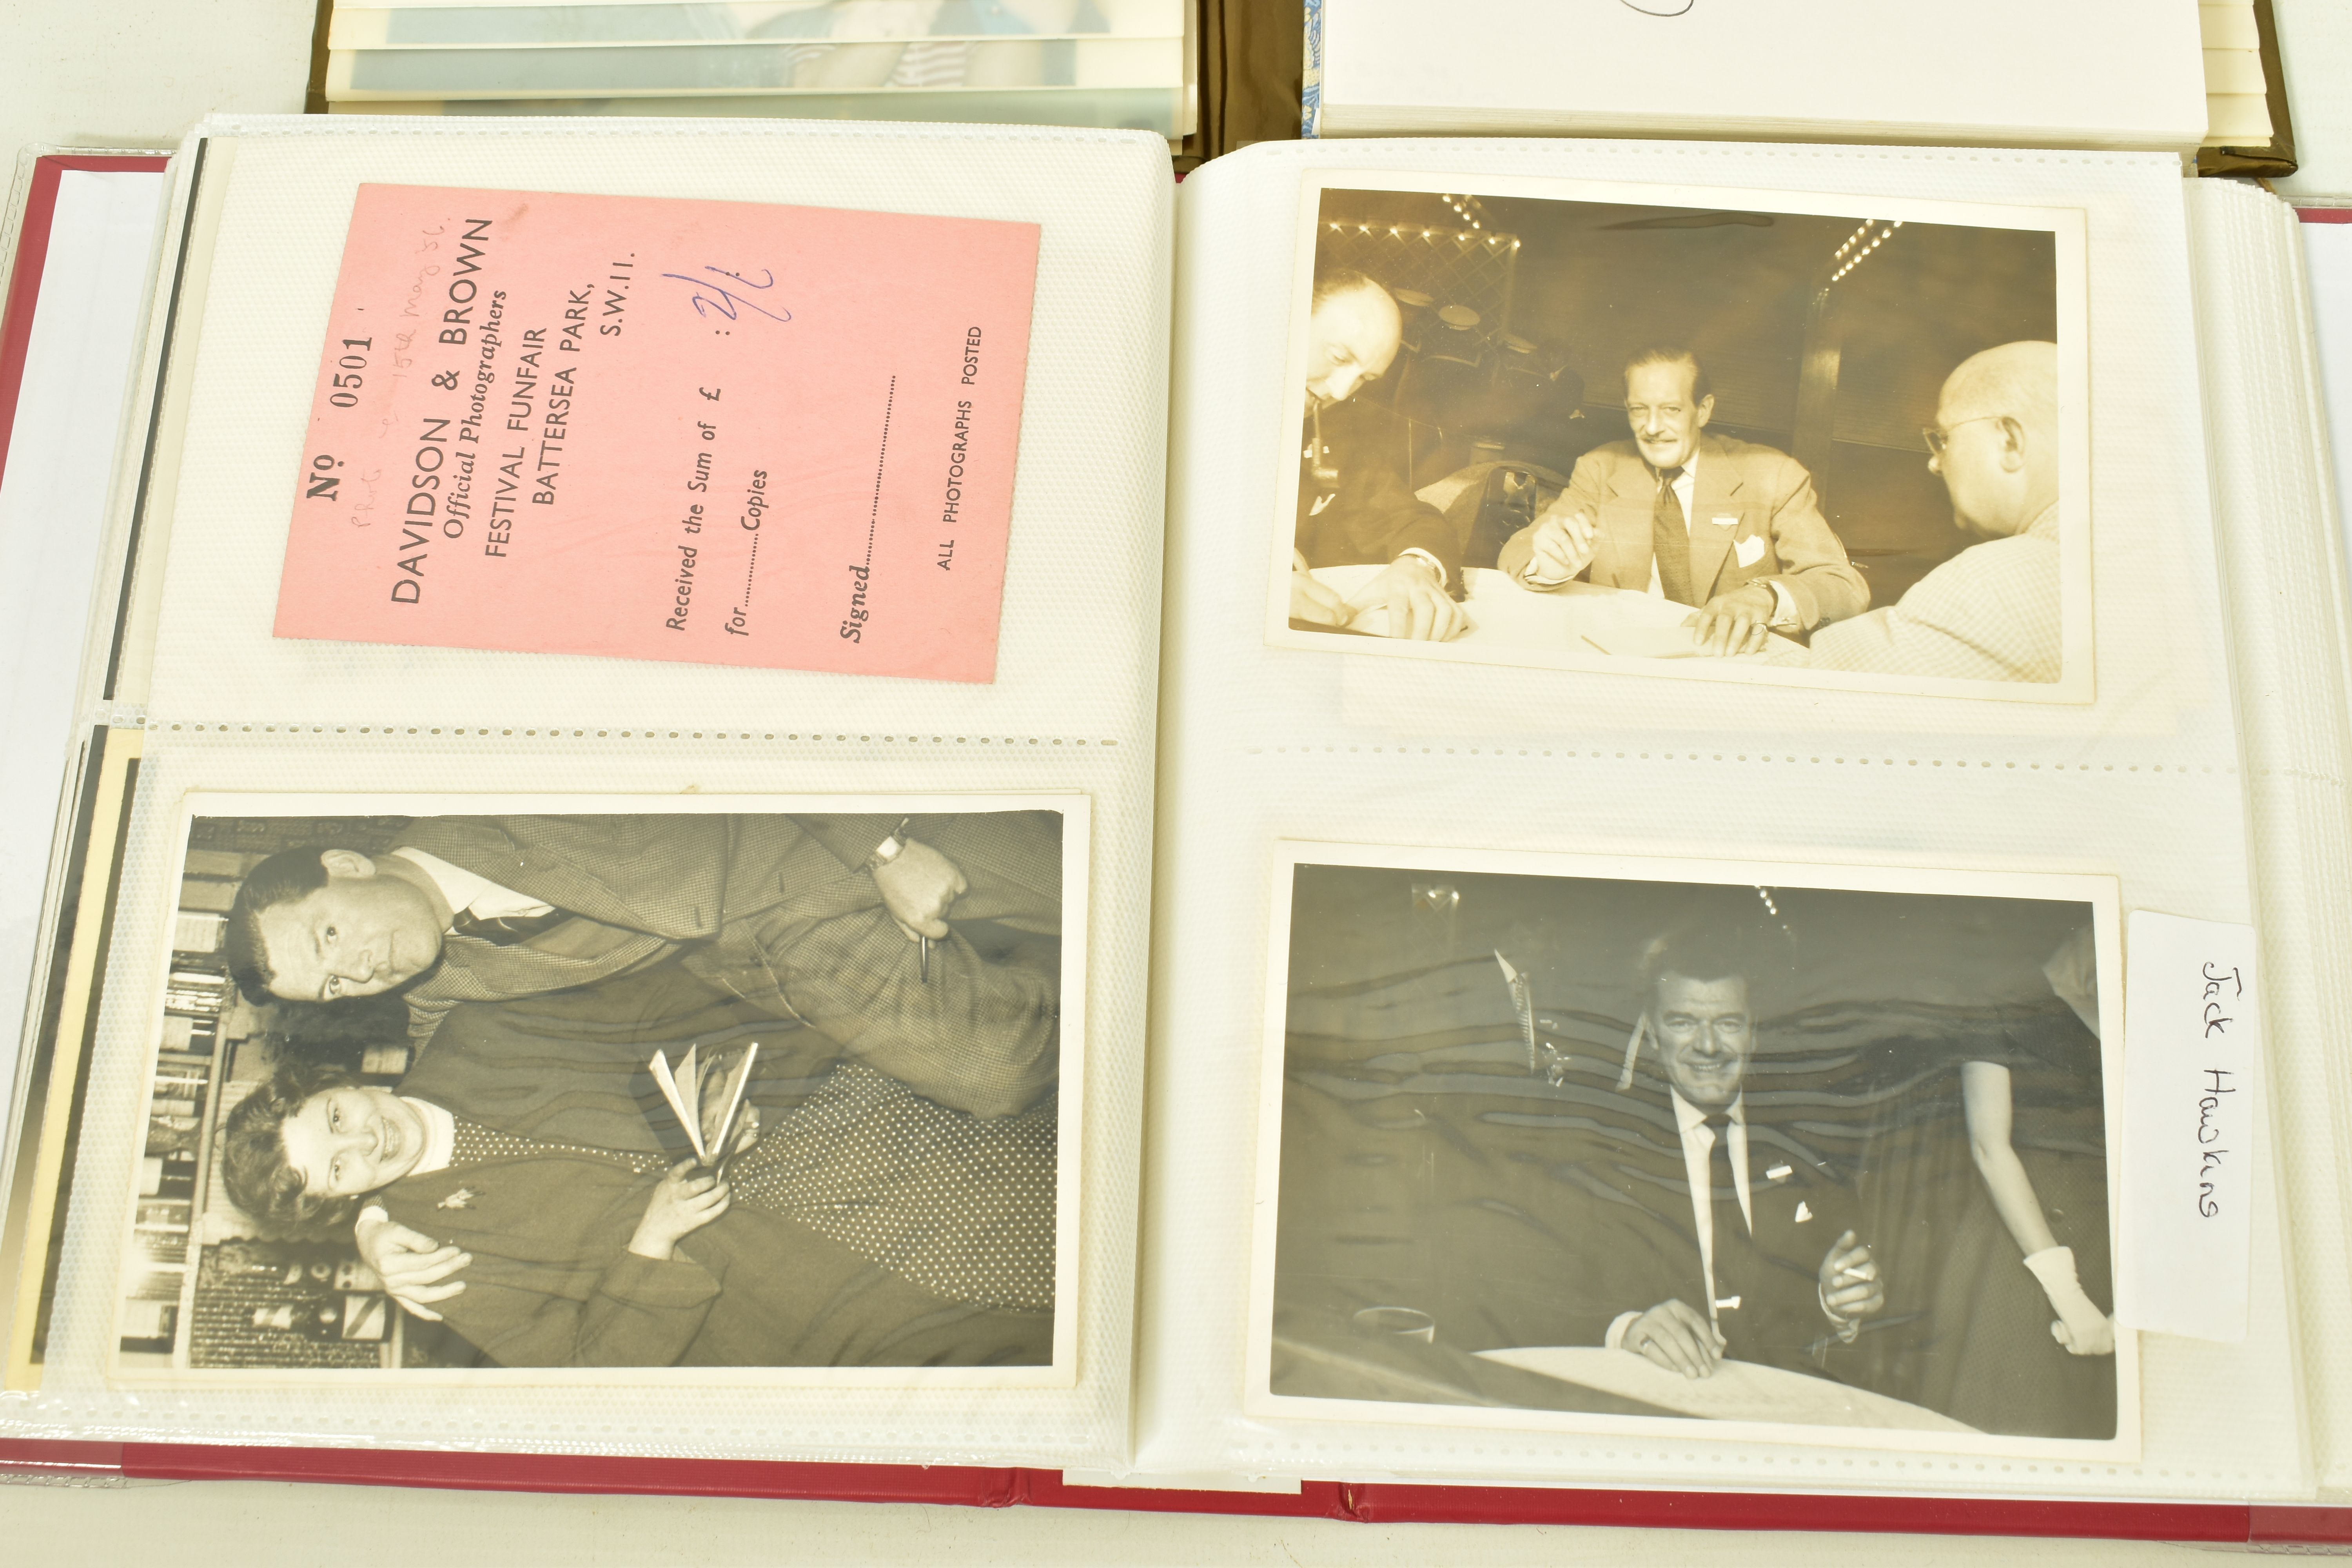 FILM, TELEVISION & STAGE AUTOGRAPH ALBUM & PHOTOGRAPHS, a collection featuring one album of - Image 9 of 17